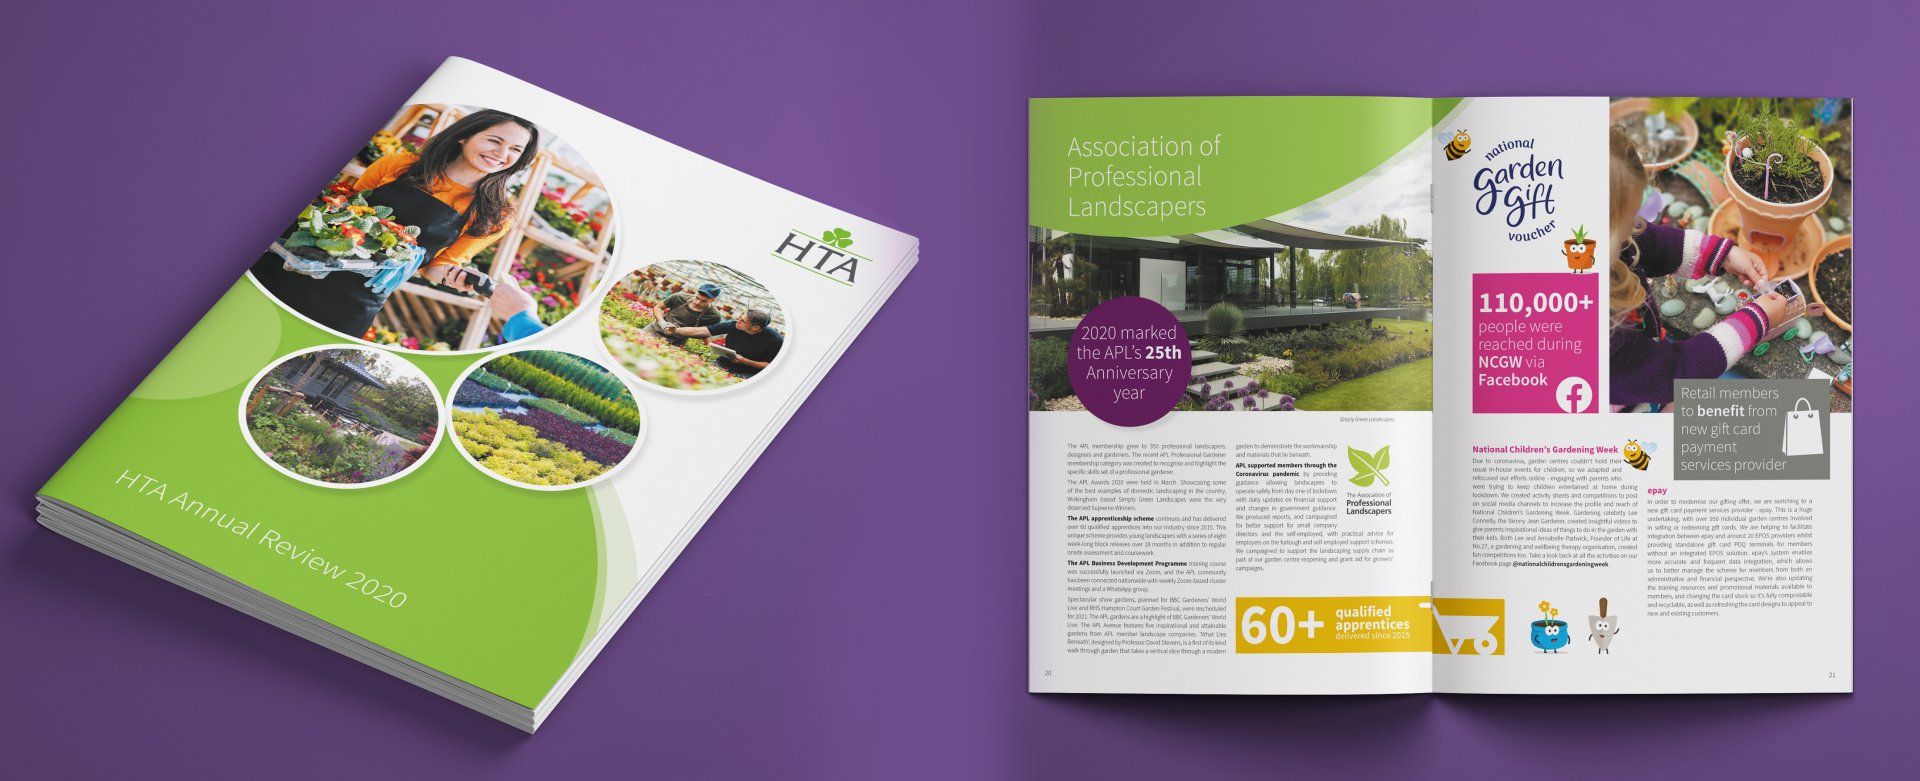 The HTA Annual Review